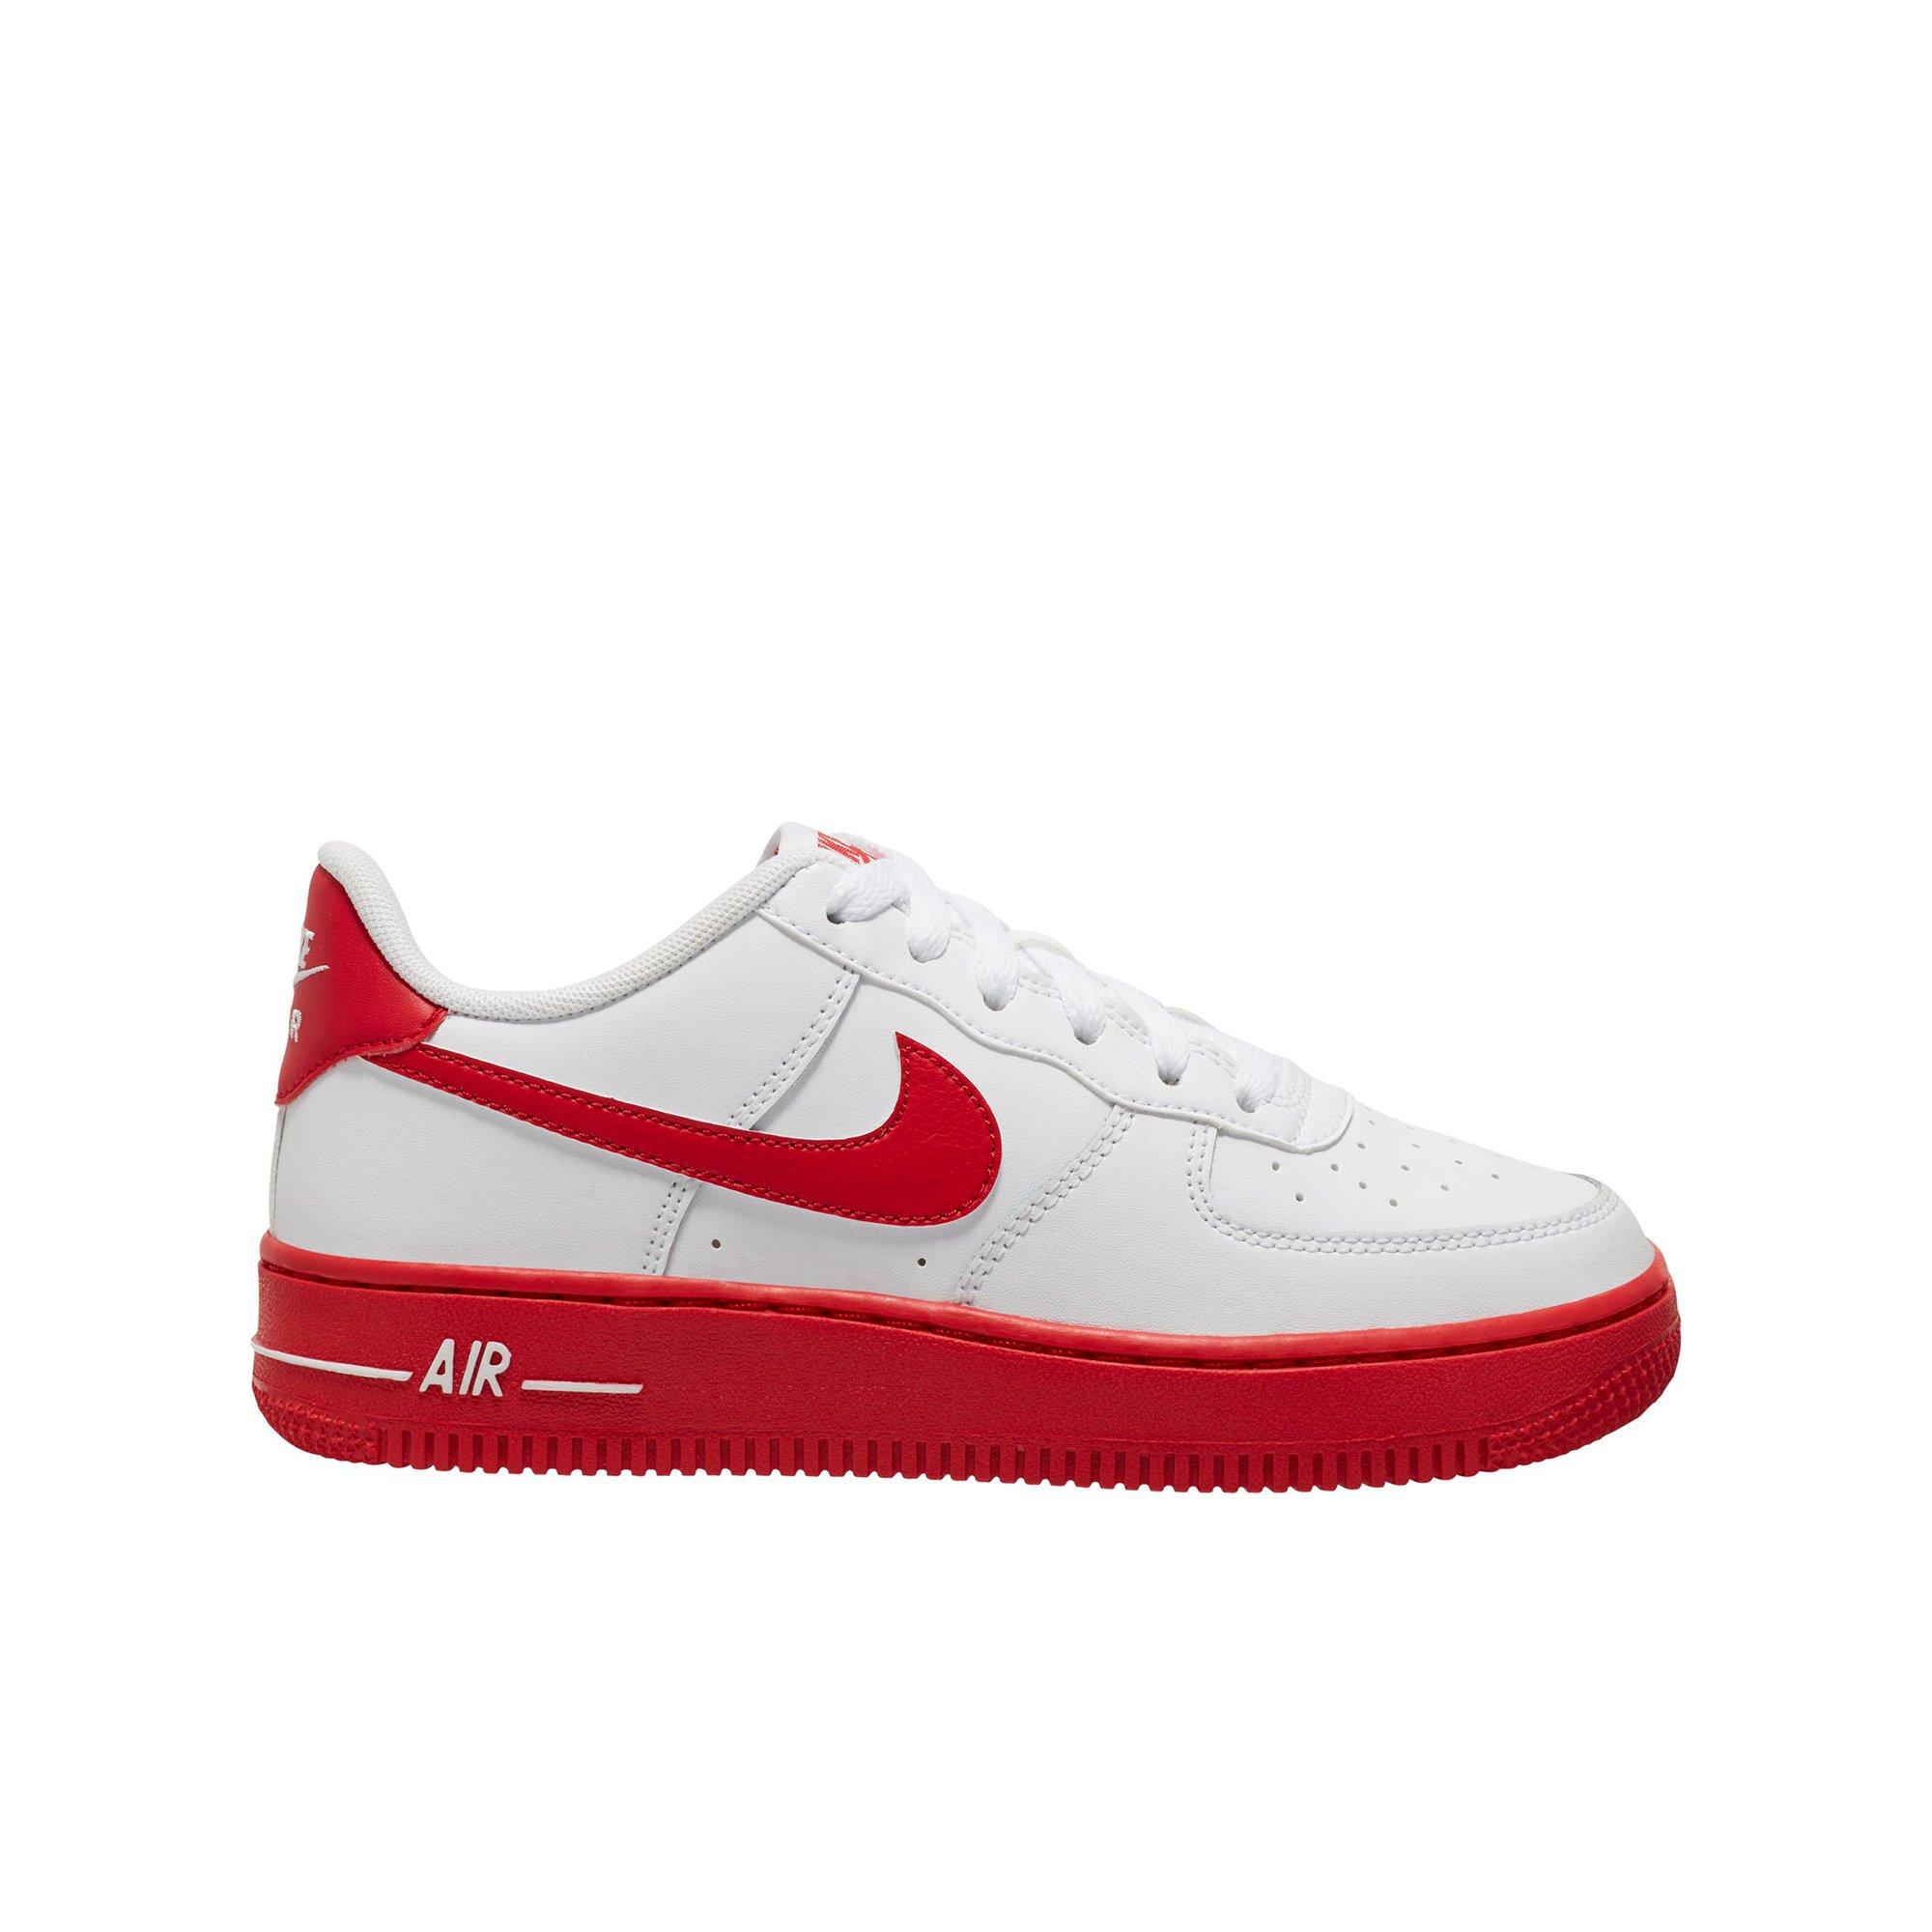 red and white air force 1 grade school